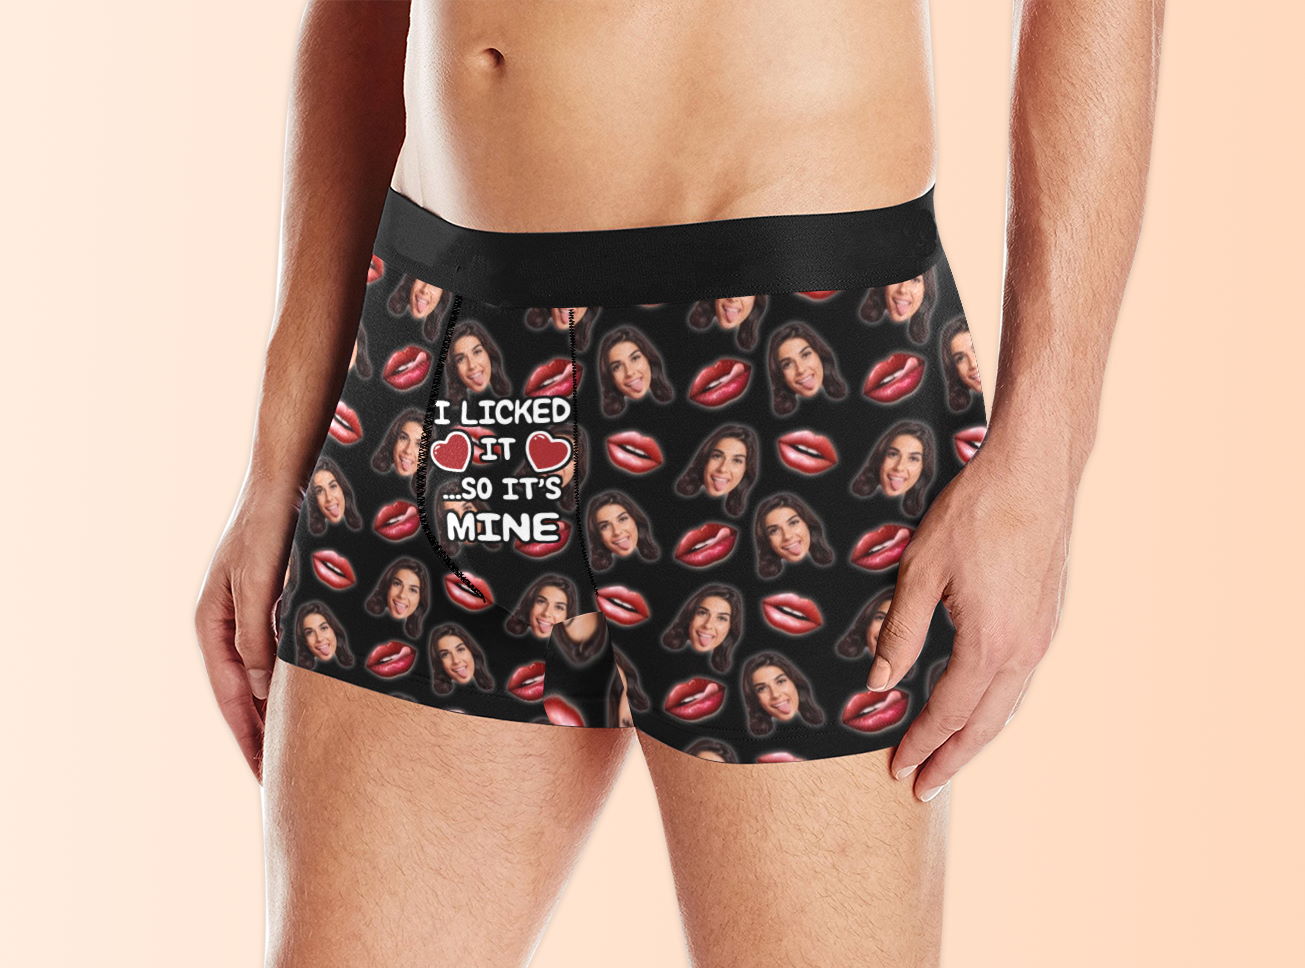 I Licked It So It's Mine - Personalized Custom Men's Boxer Briefs - Gi – A  Gift Customized